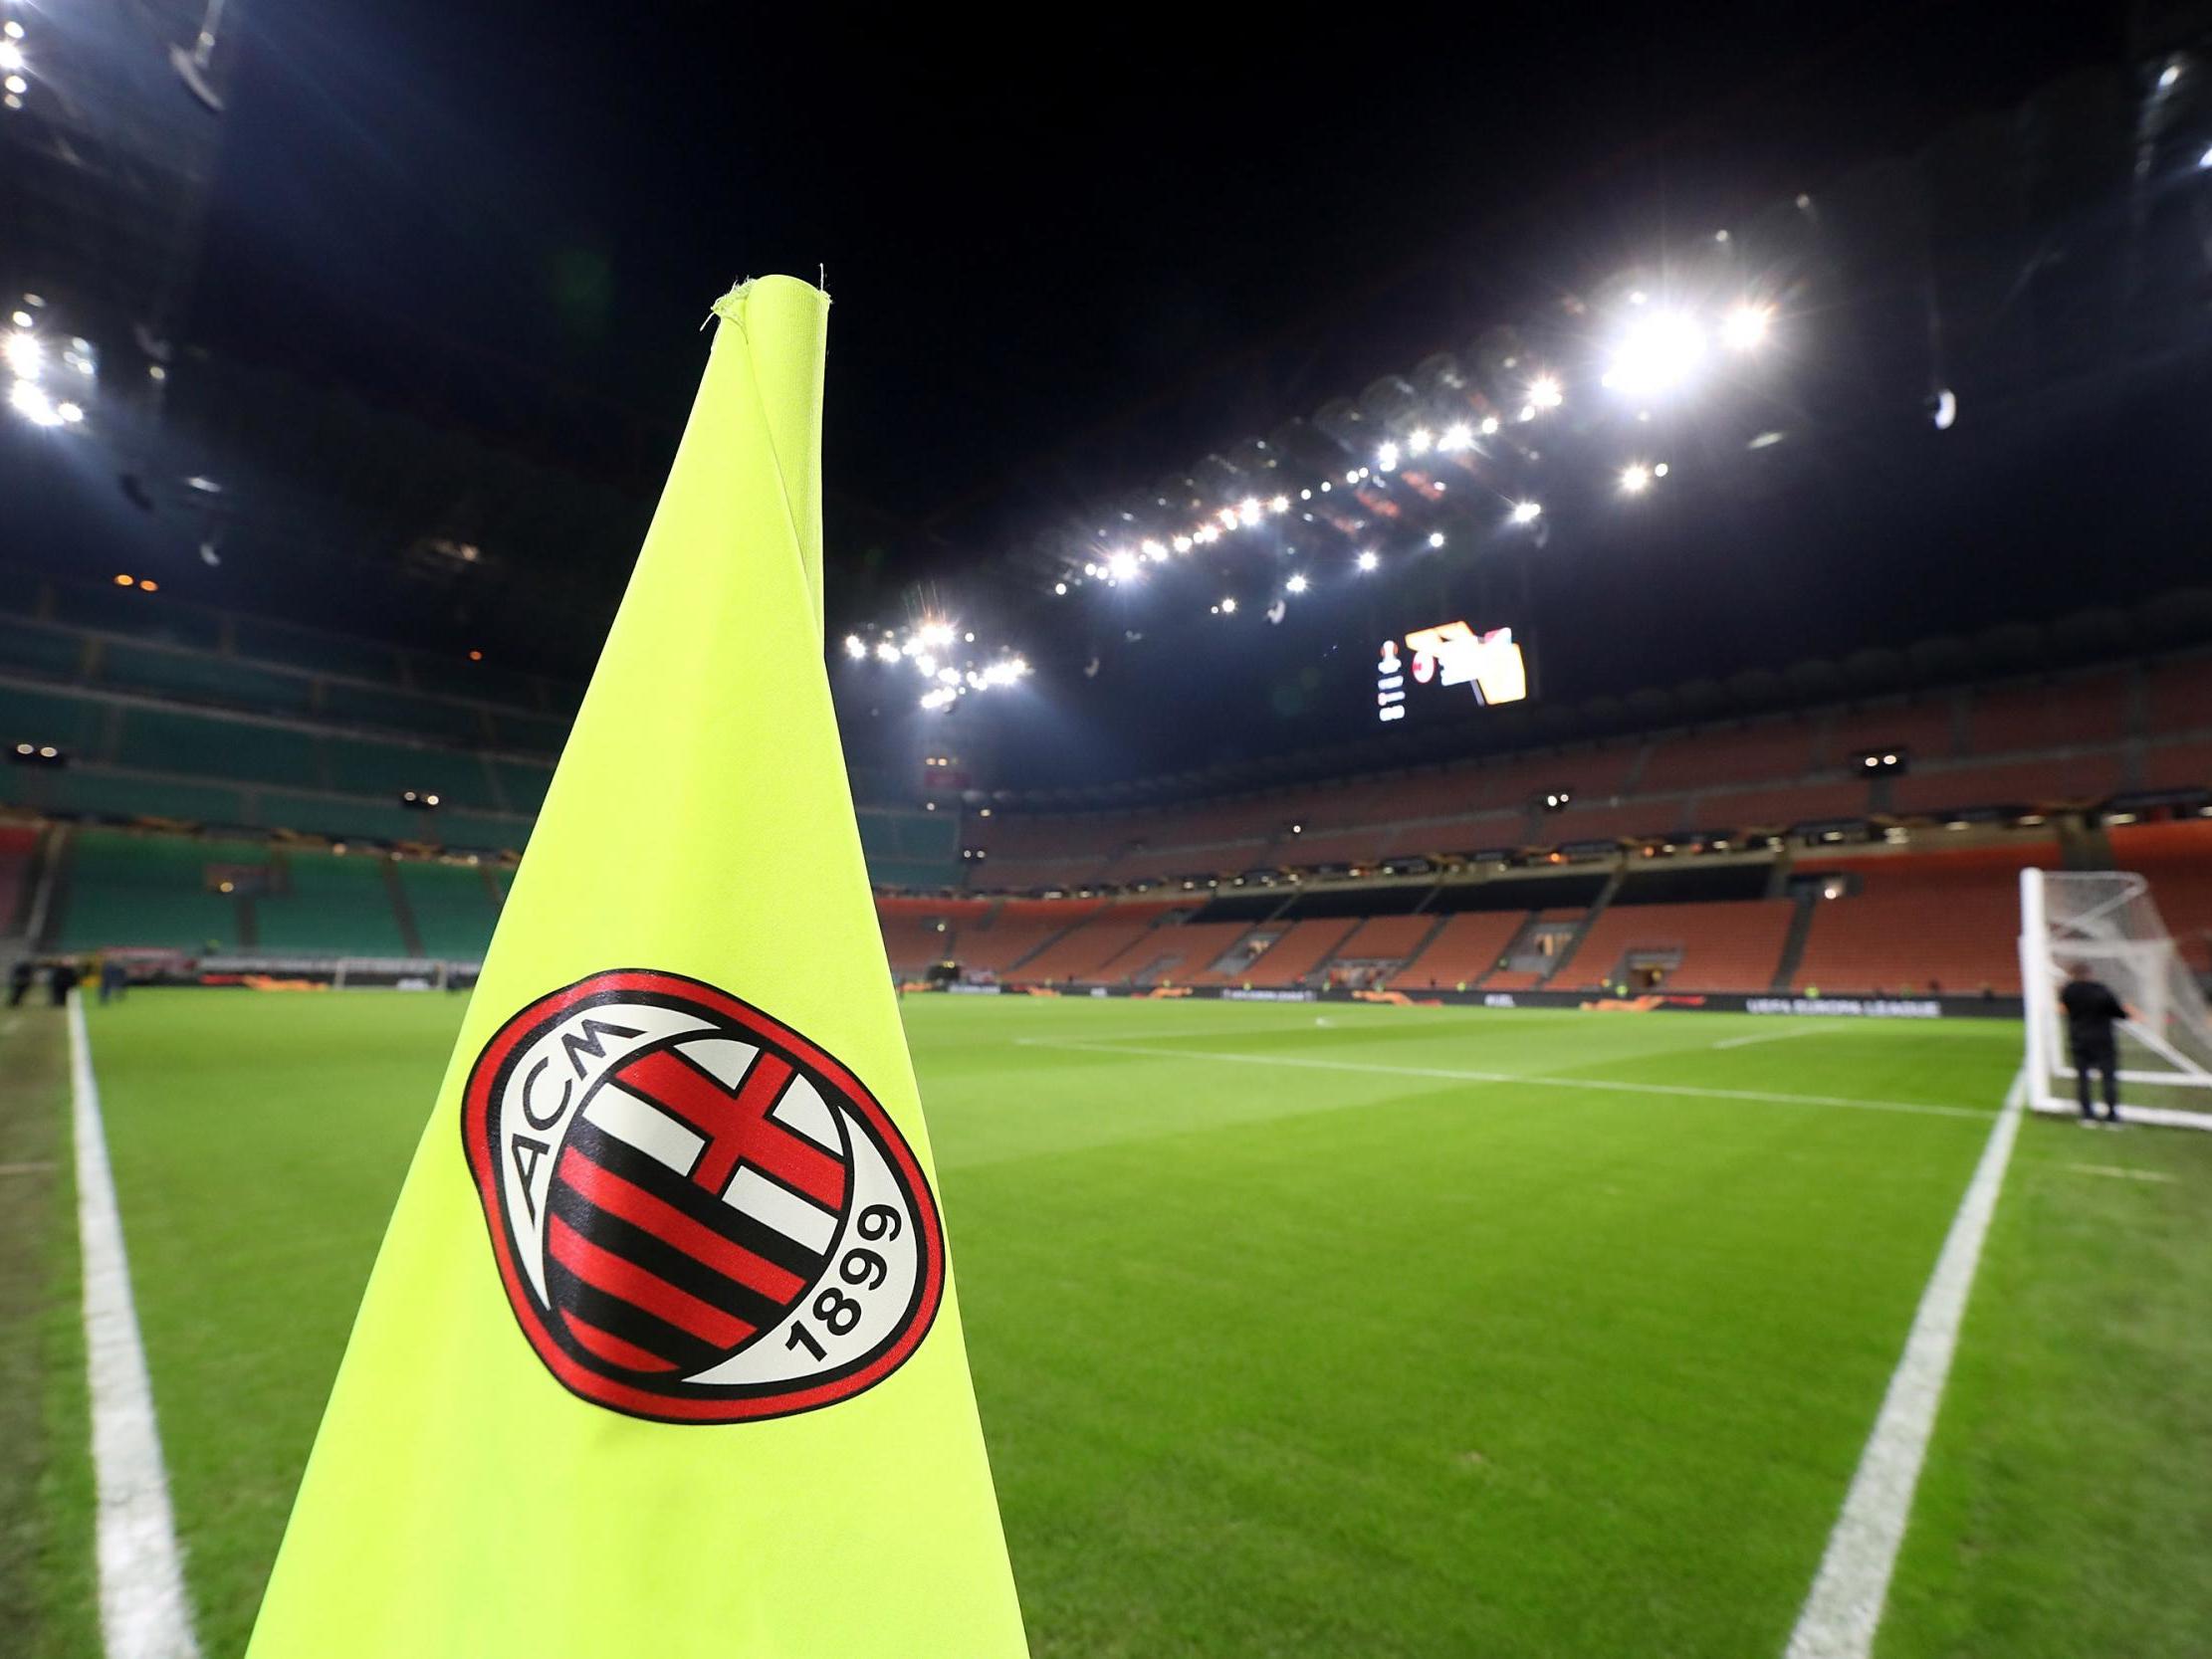 AC Milan can appeal to the Court of Arbitration for Sport